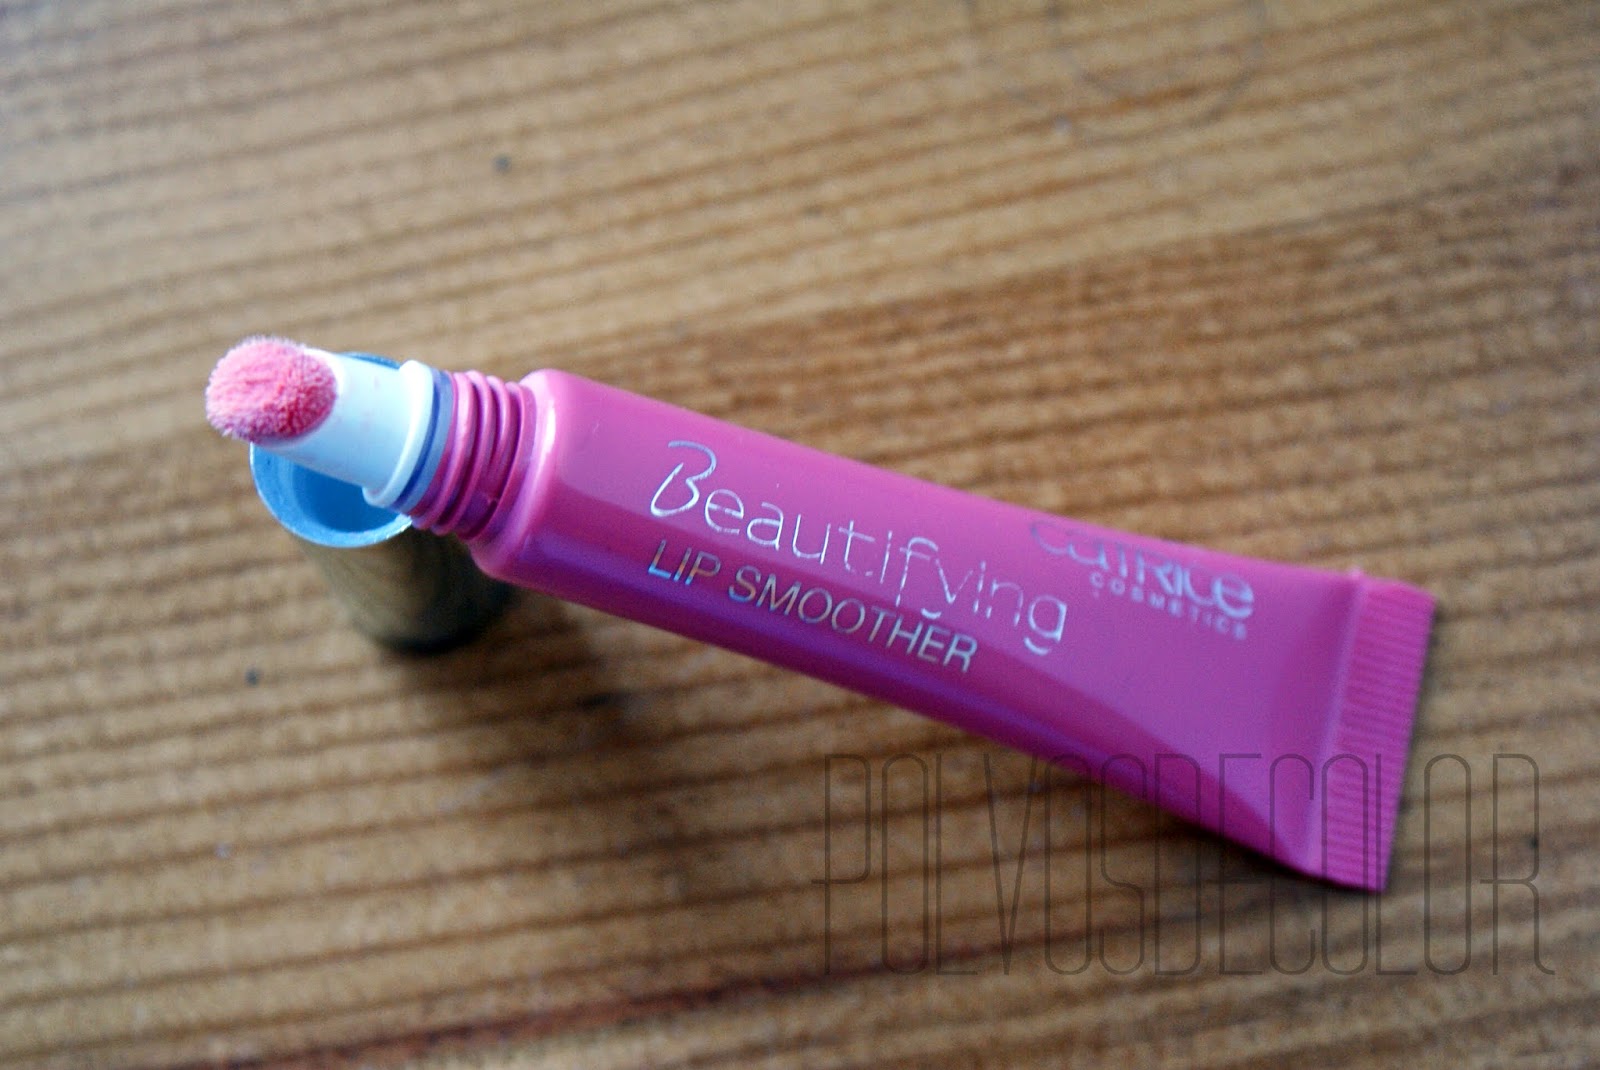 Reseña: Beautifyng Lip Smoother de Catrice